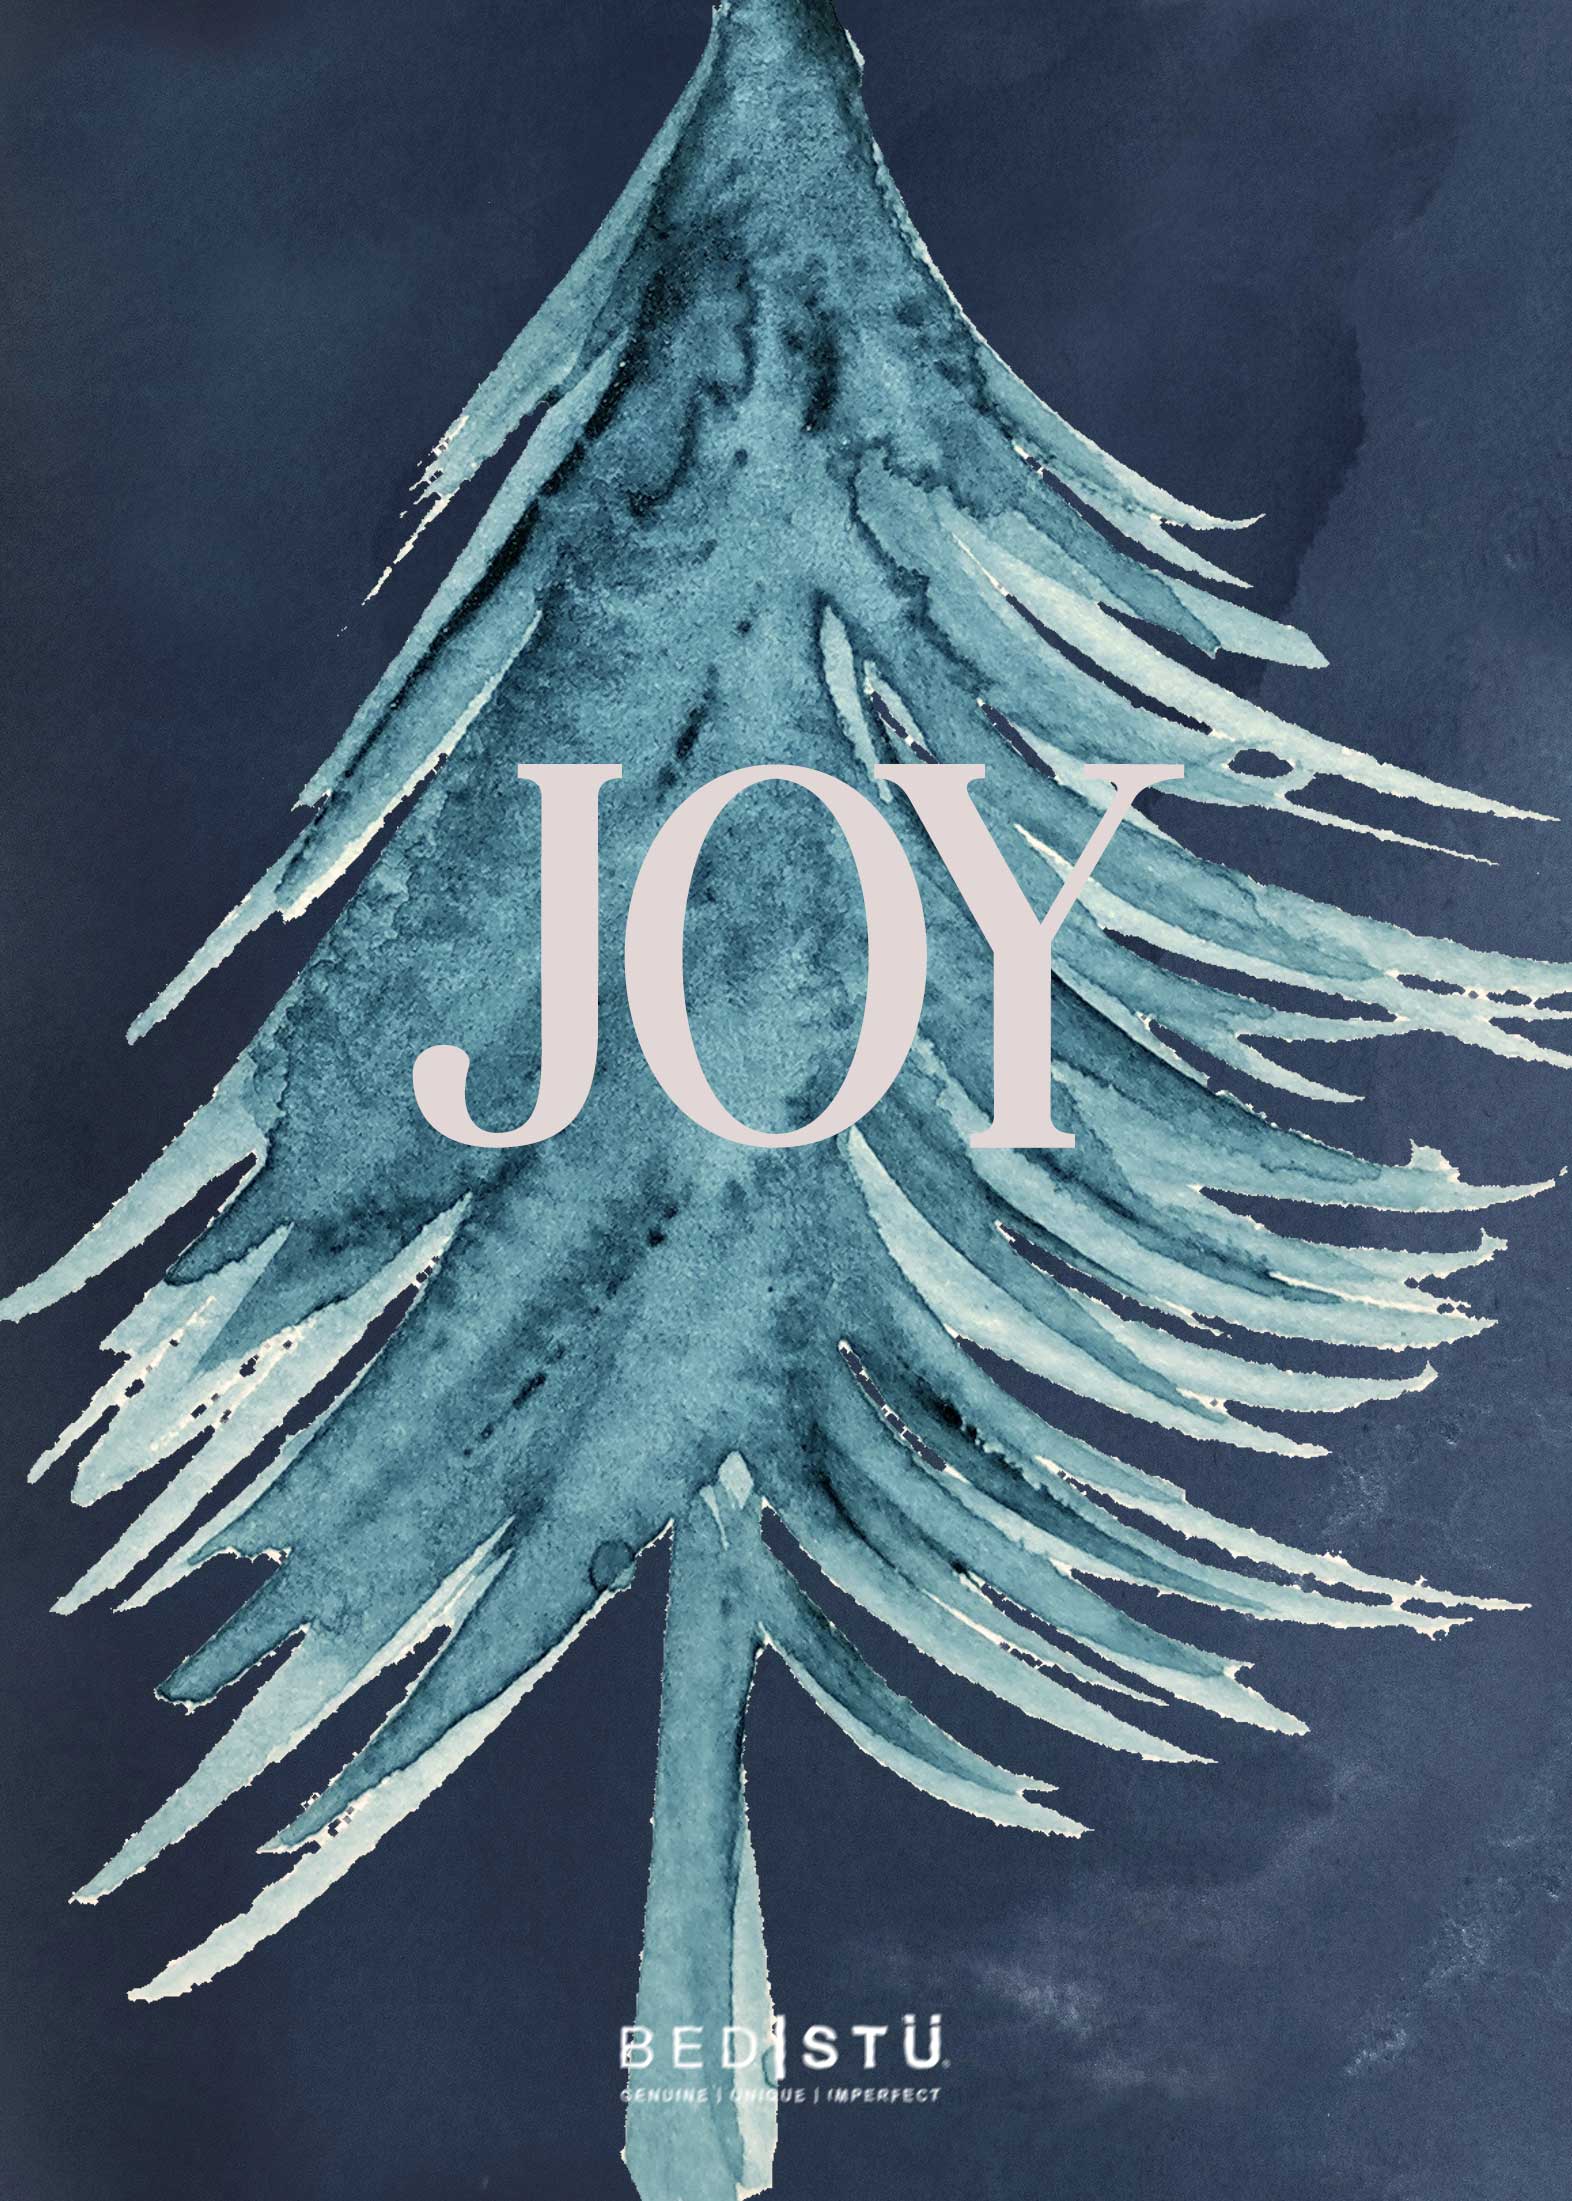 A Bed|Stü Christmas card with the word Joy on it.